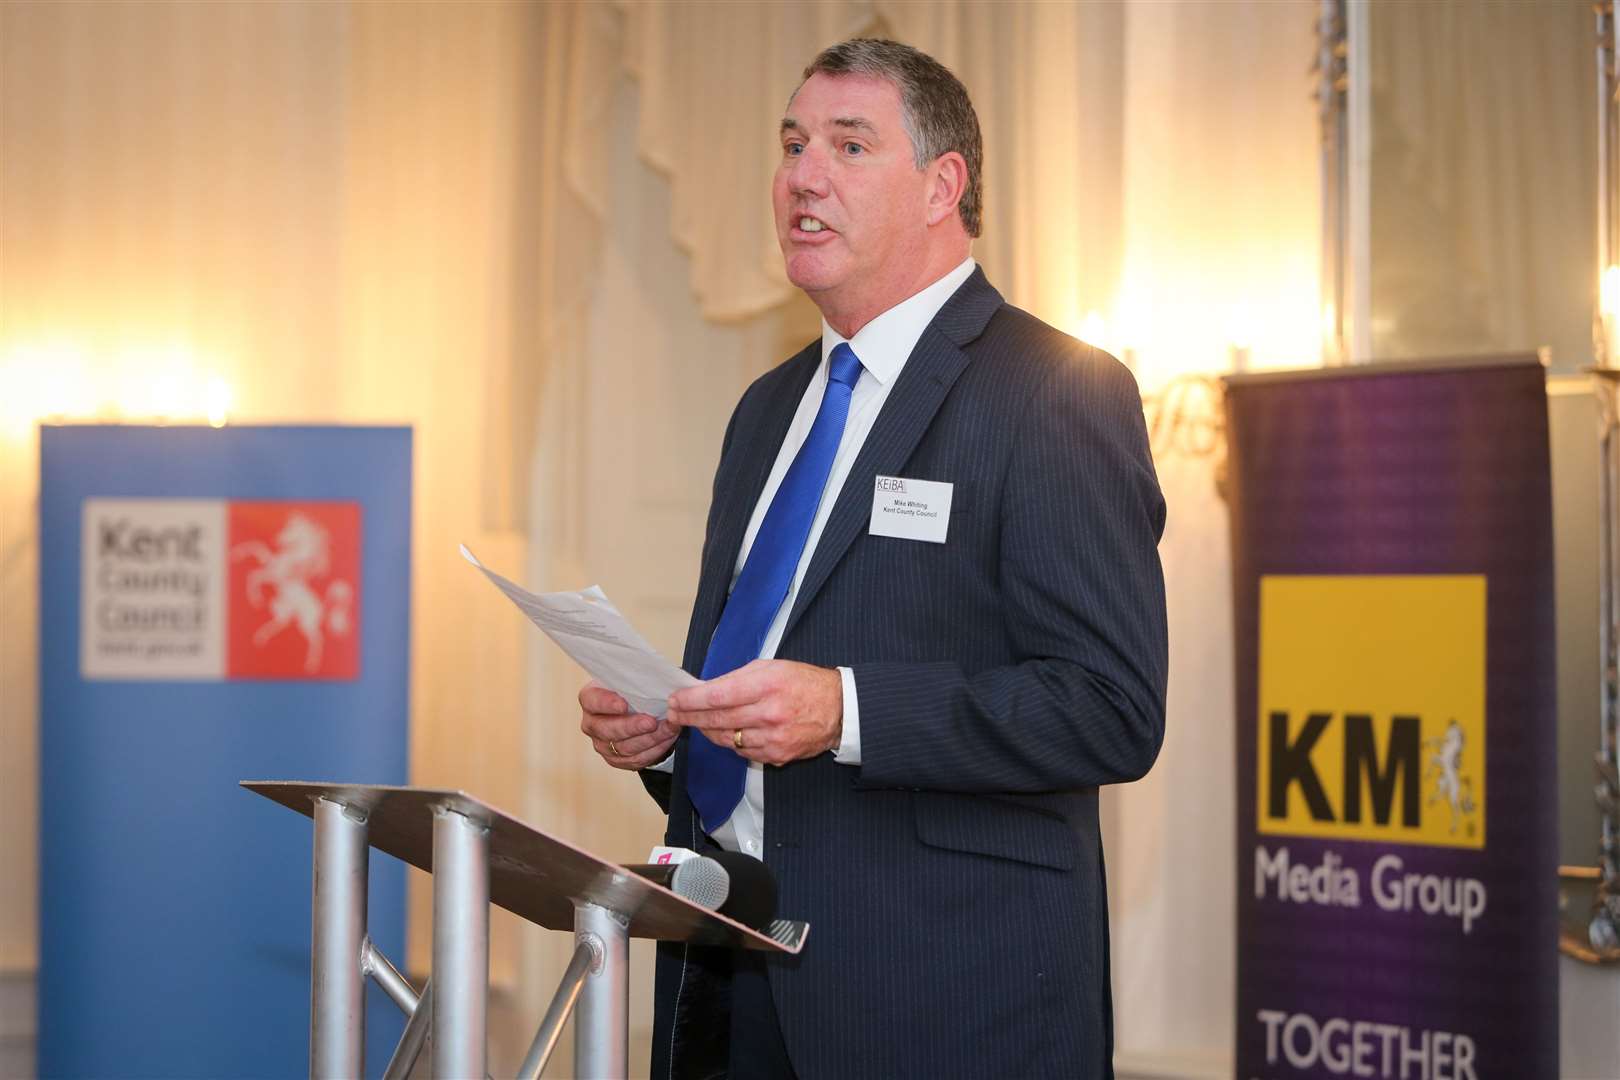 KCC's head of economic development, Mike Whiting addresses the audience